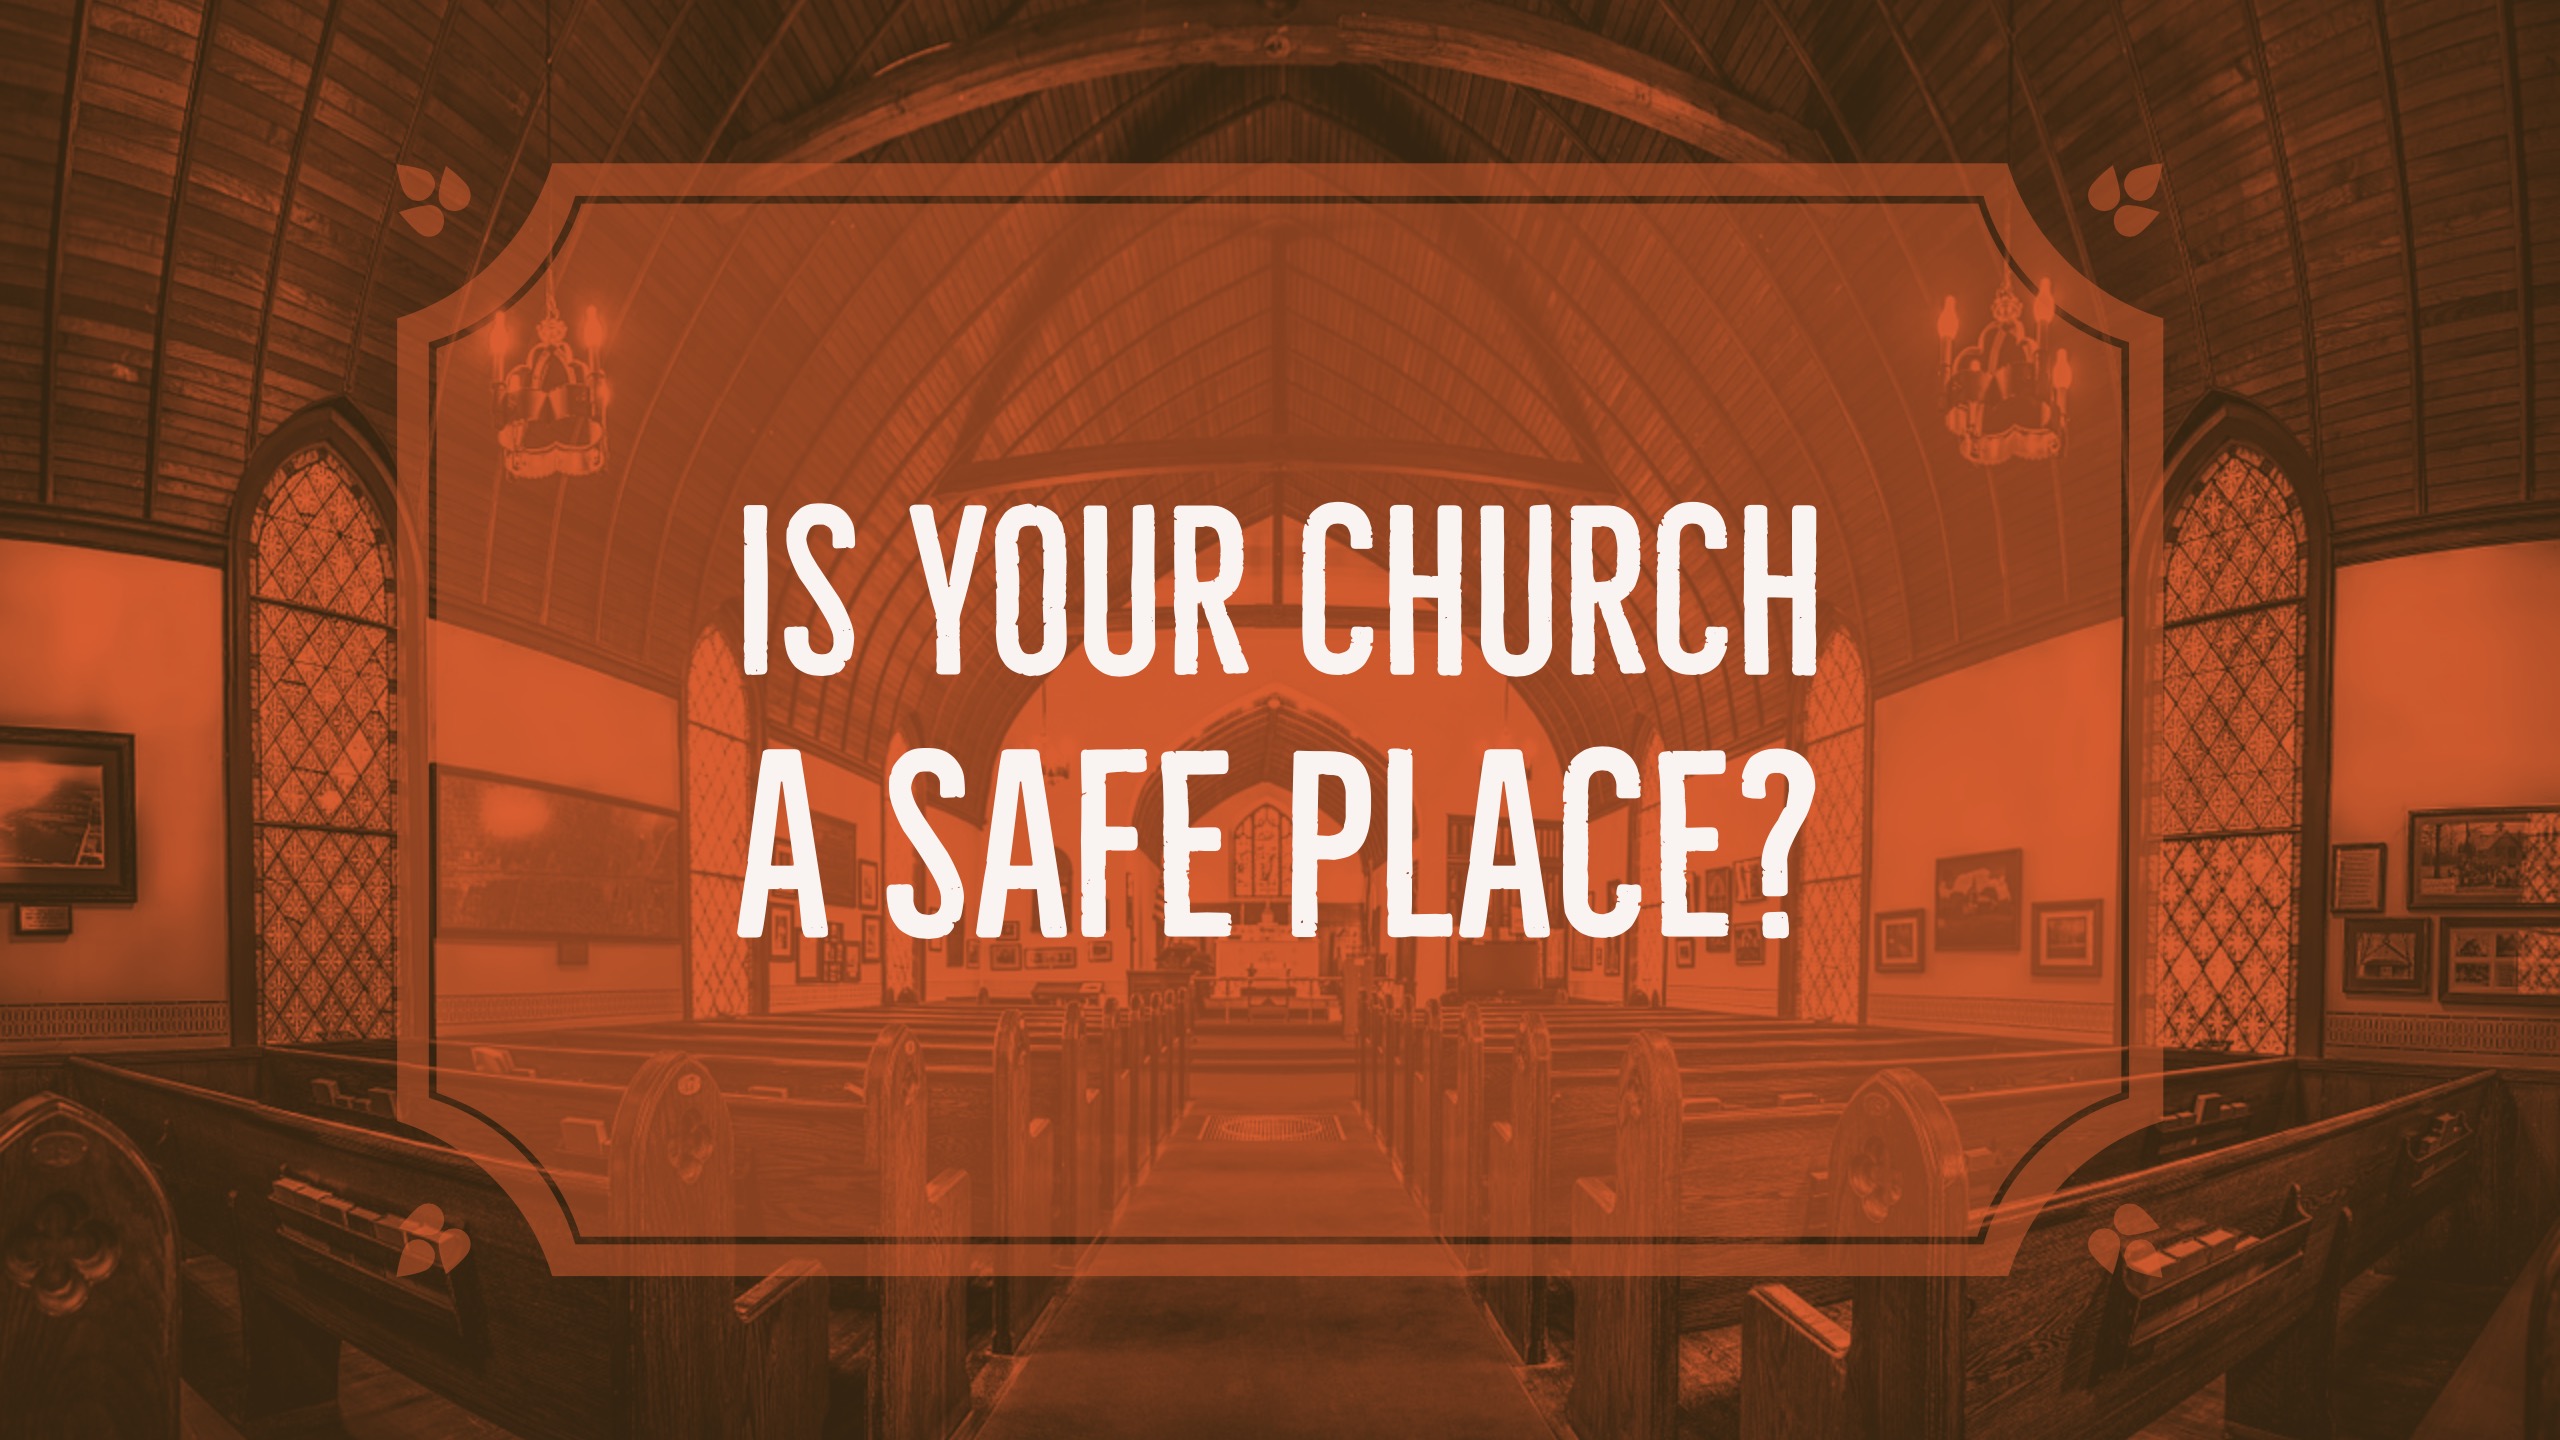 Is your church a safe place?